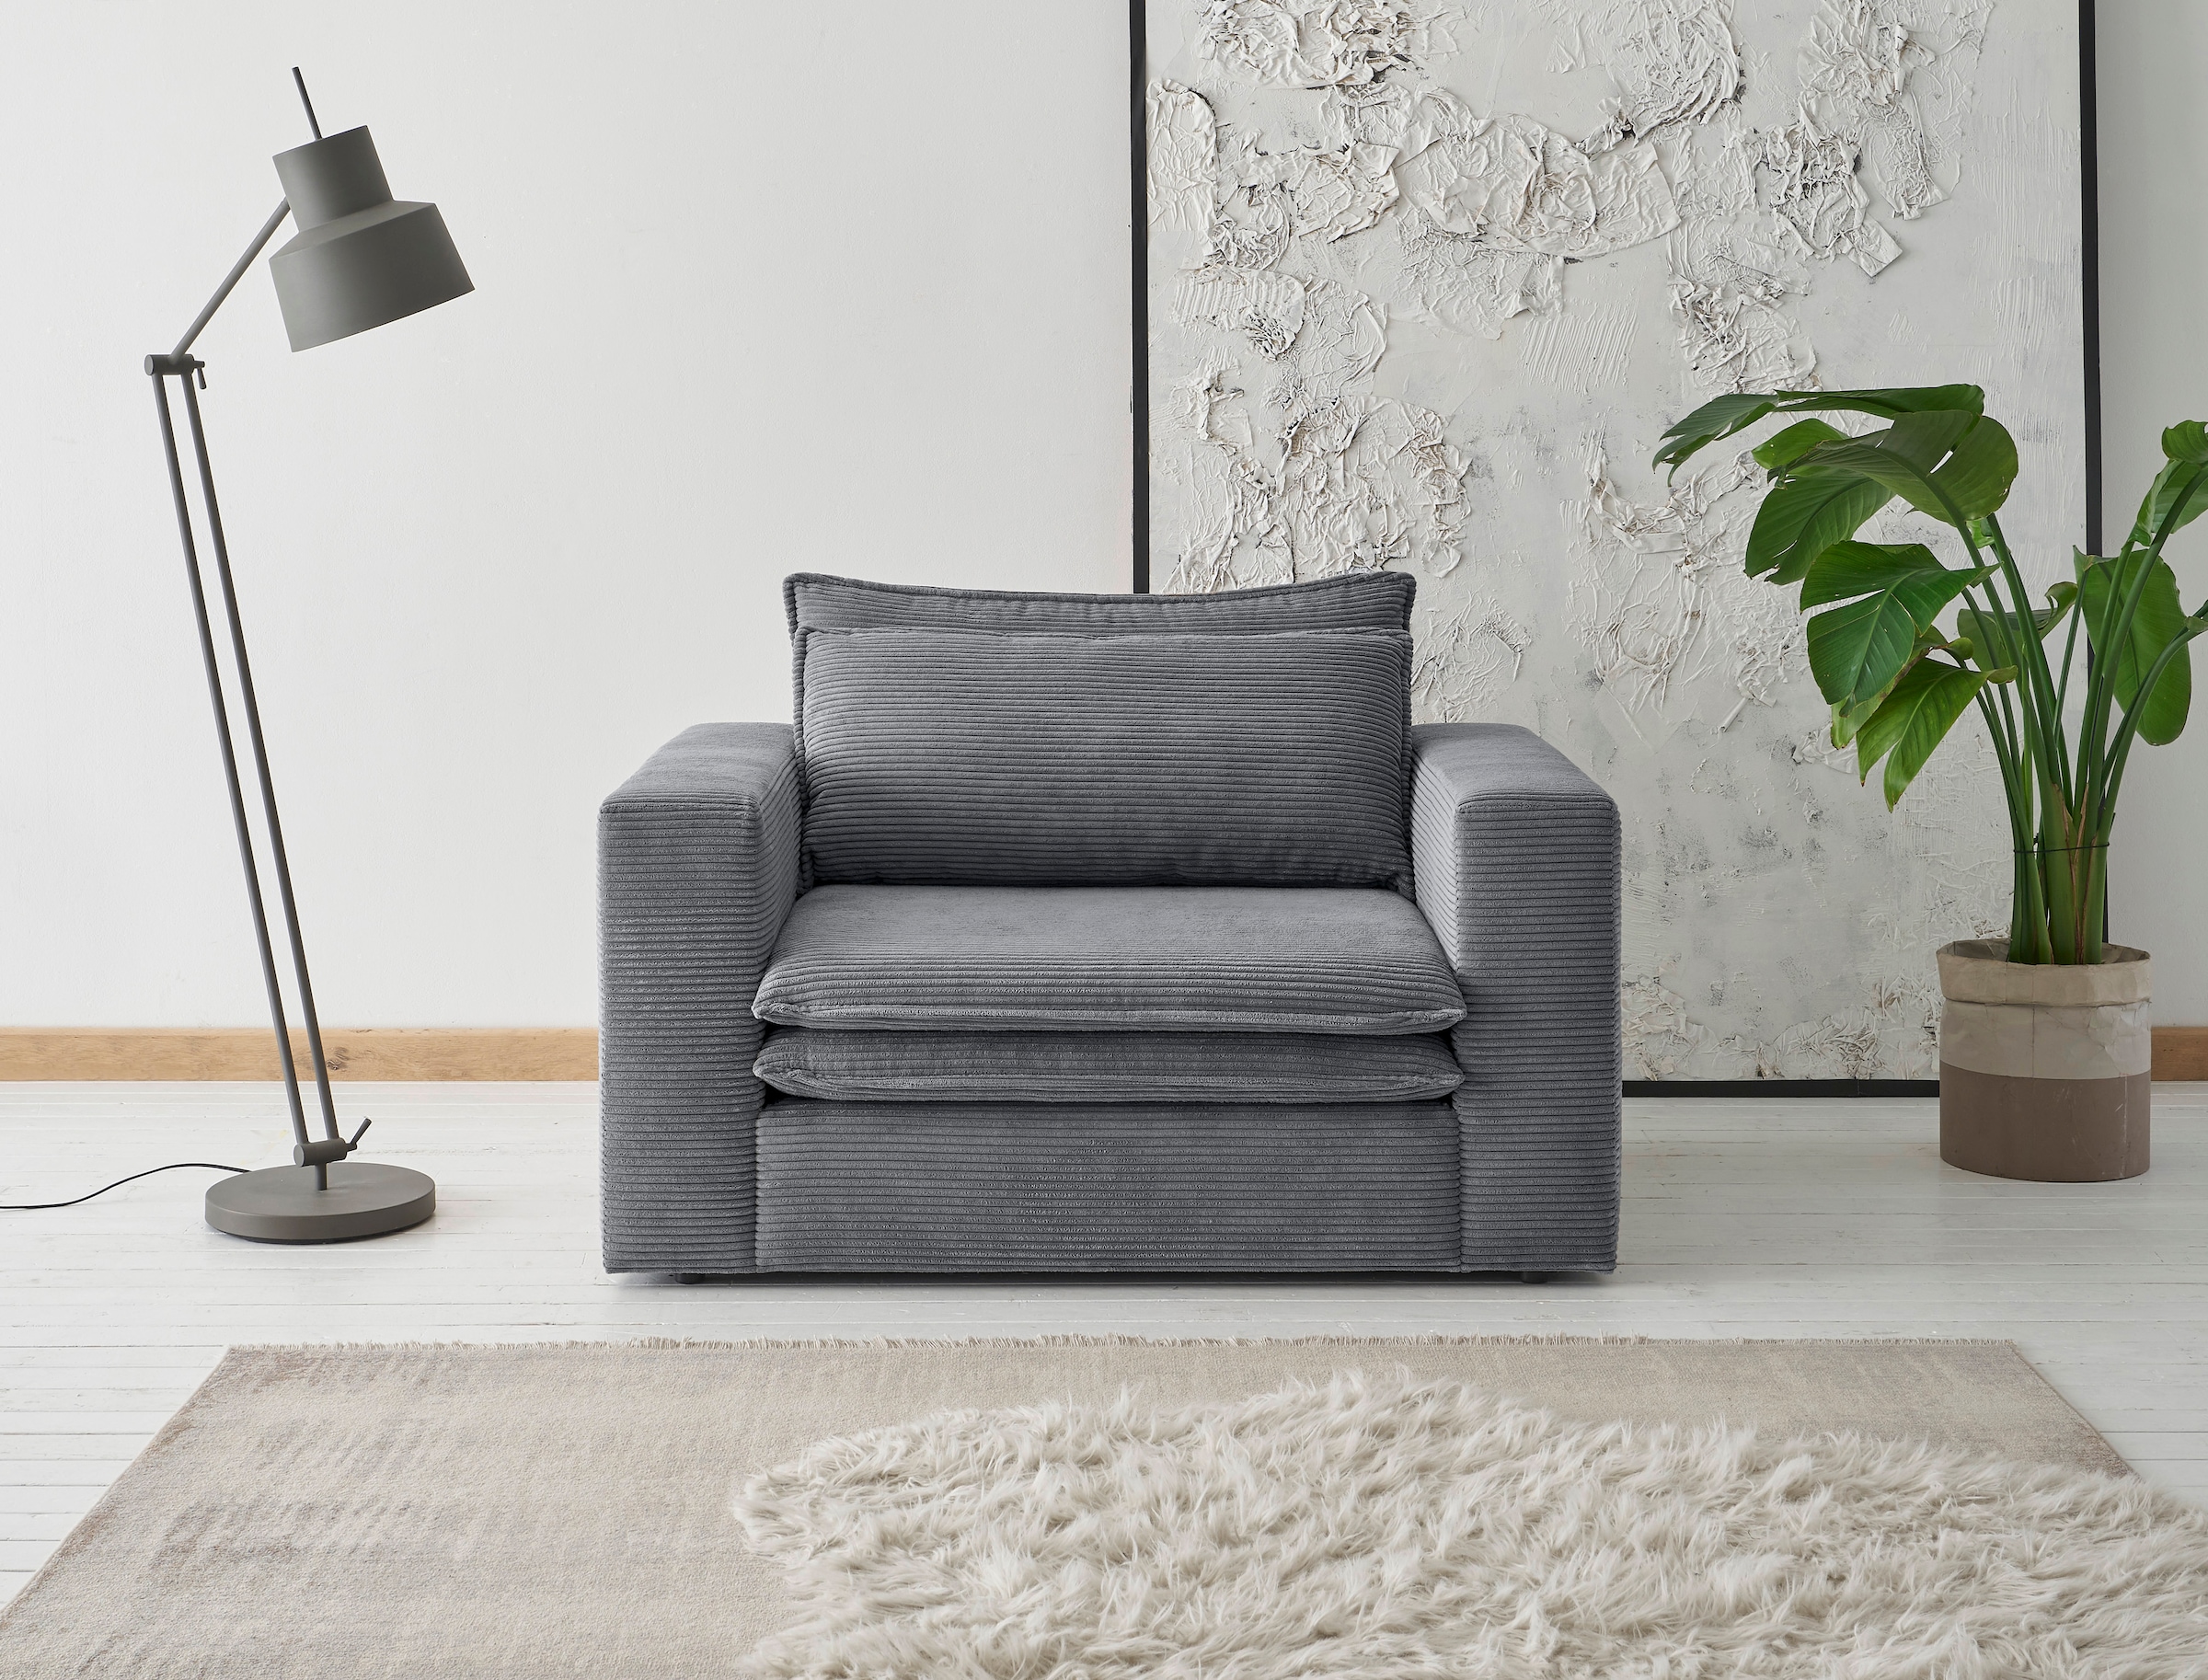 Places of BAUR »PIAGGE« kaufen Loveseat | Style